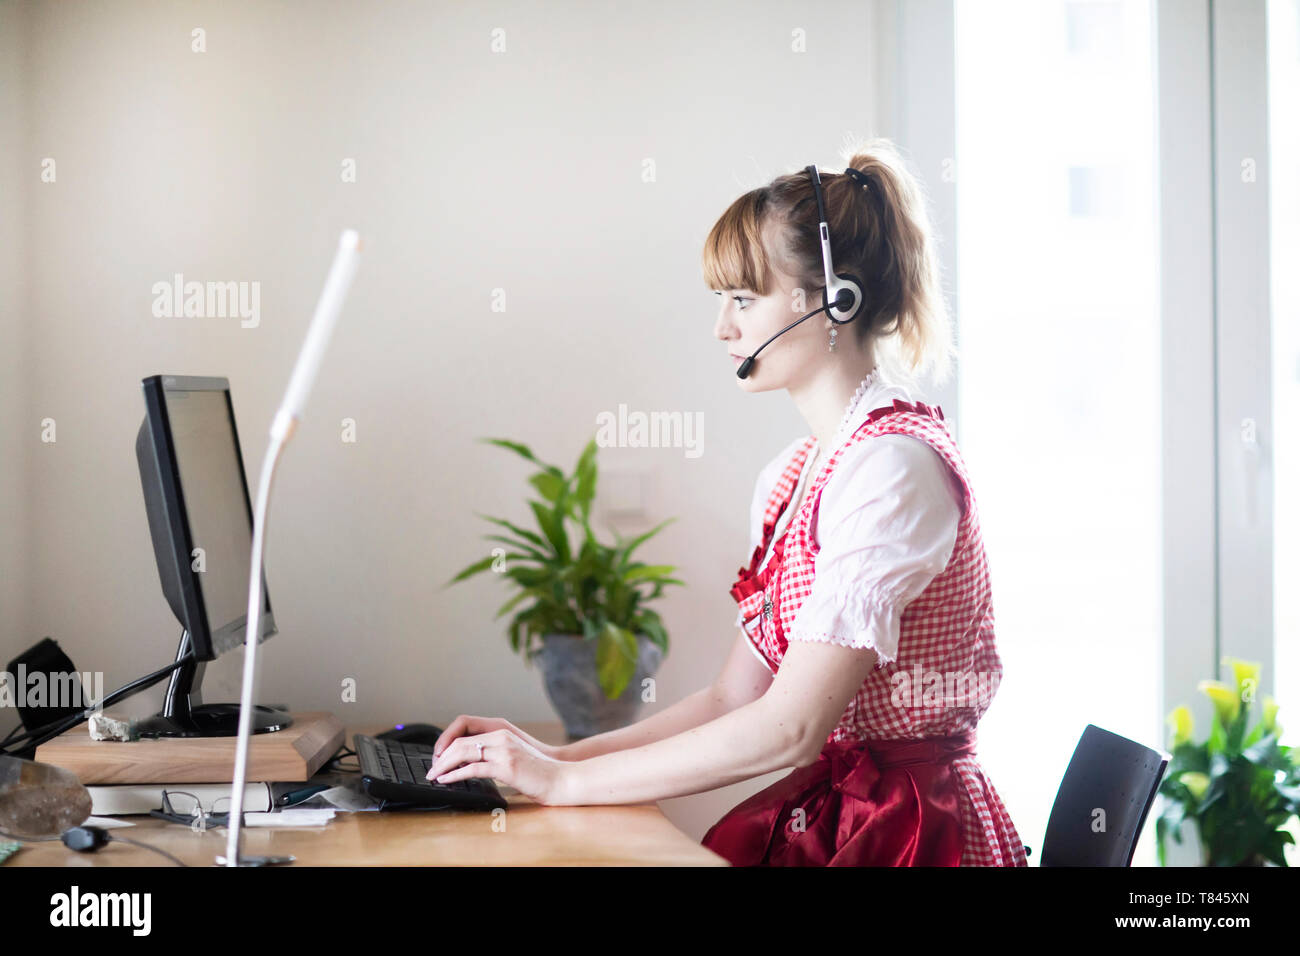 Woman using computer in home office Stock Photo